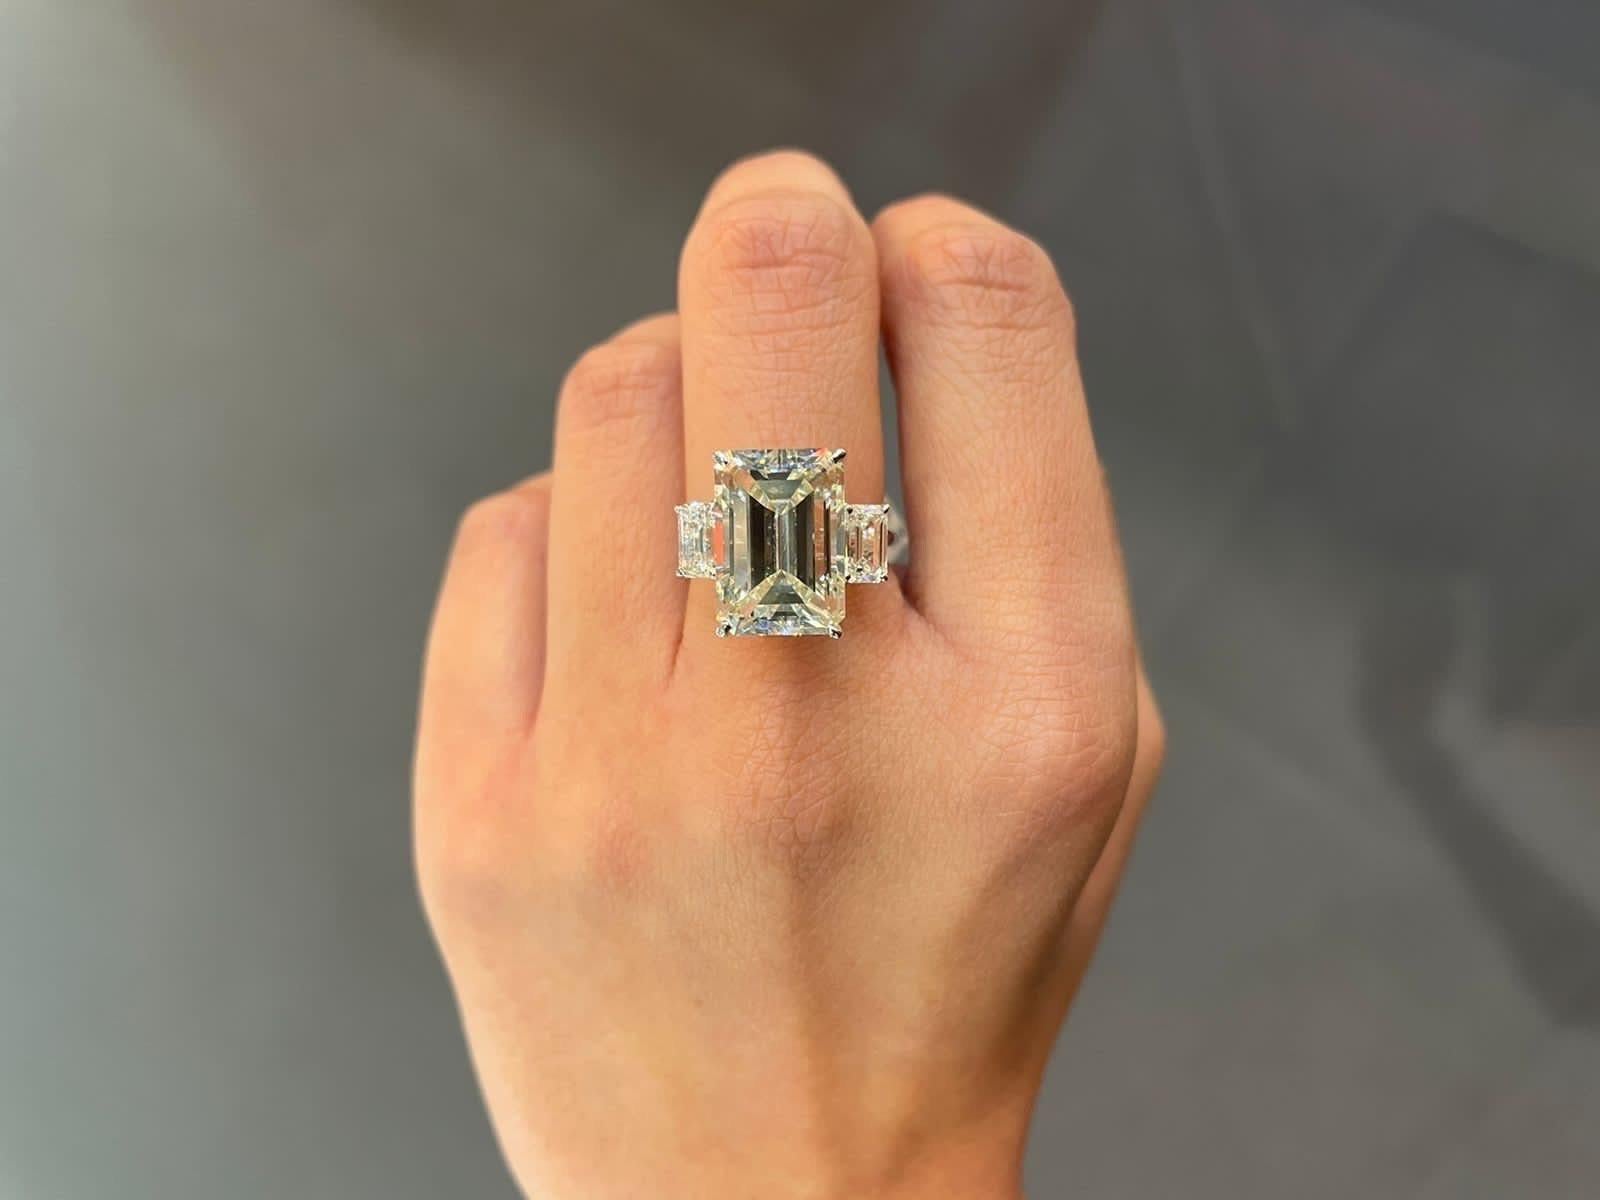 Make a statement with this stunning 8.10 carat emerald cut natural Diamond three-stone engagement ring. The center stone weighs 8.10 carat, K color, VS1 quality, with two smaller emerald cut diamonds next to it - all set in solid 18K white gold.